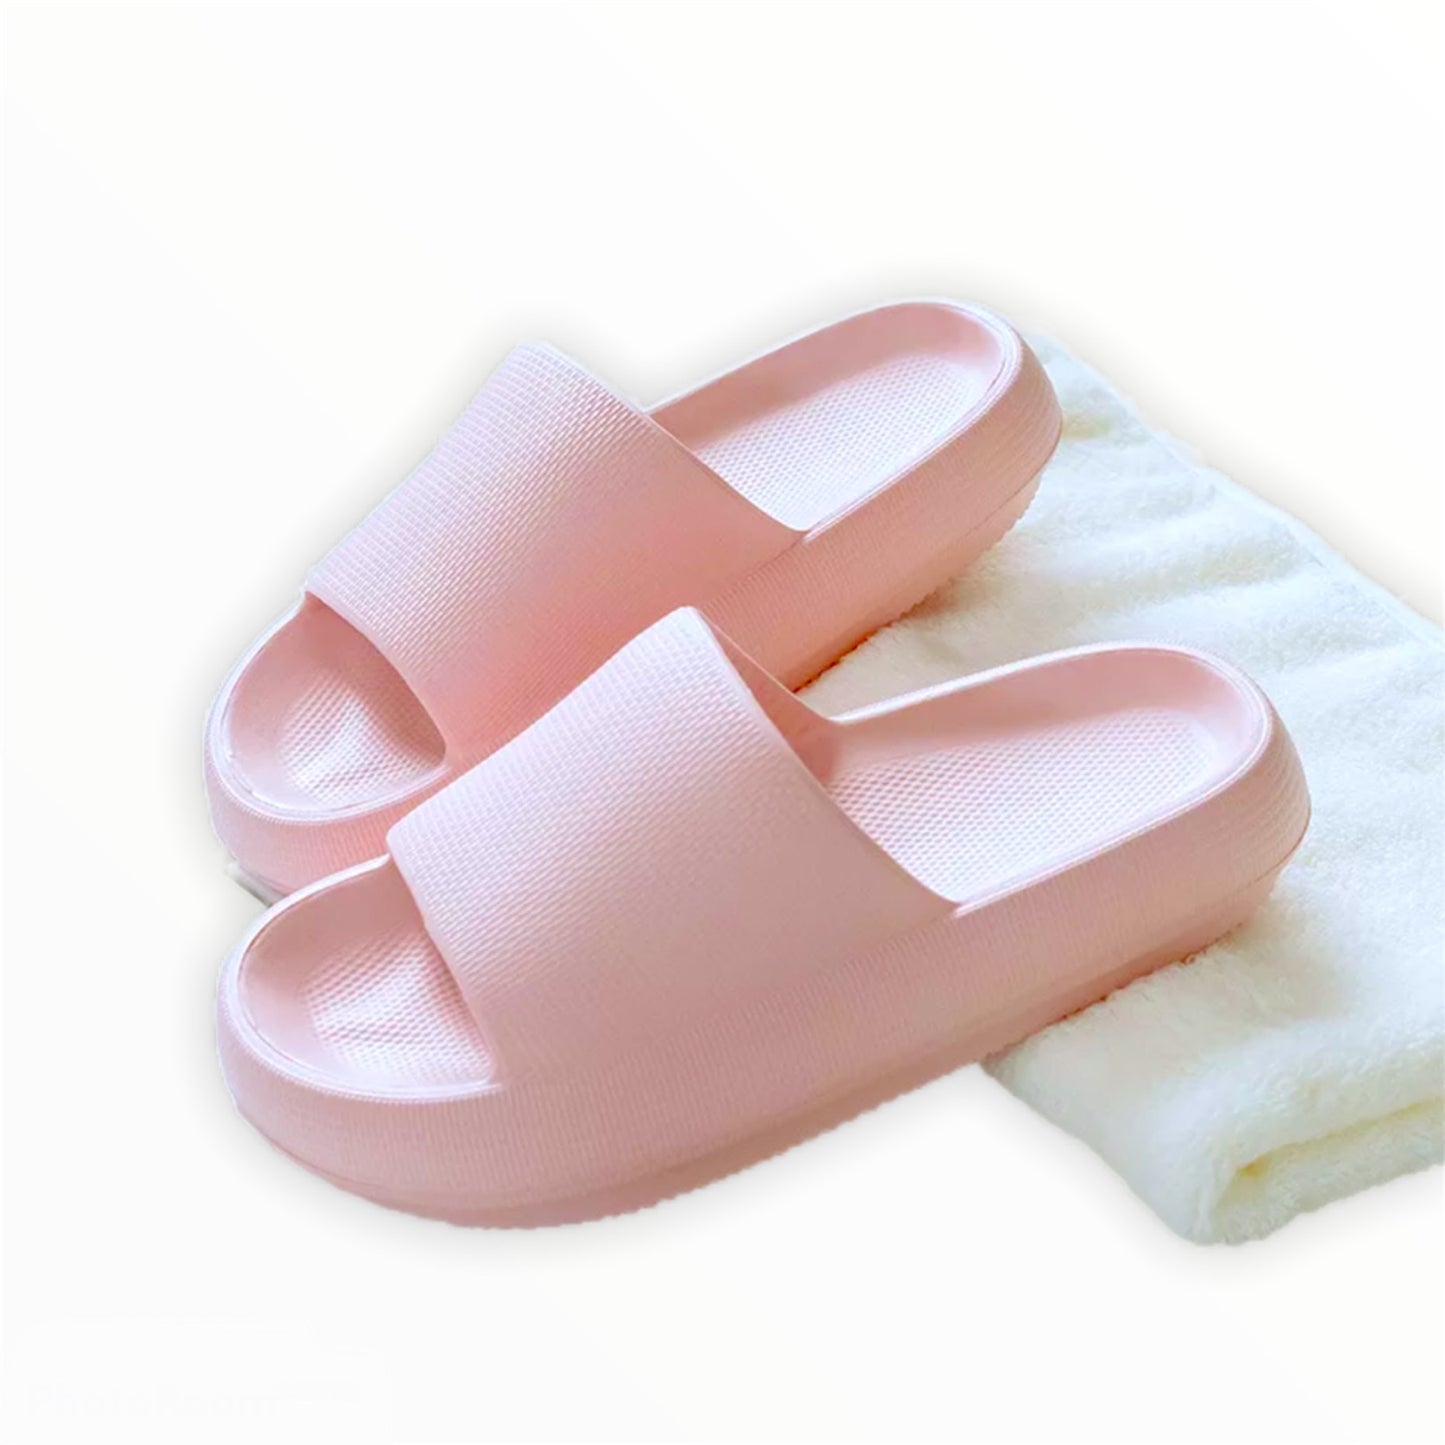 Take A Step Into Heaven & Enjoy Endless Comfort For Your Feet. Built For All Day Comfort. The Pillow Slides Combine Versatility & Comfort. Wear Them Anywhere For Hours At A Time. Free Shipping. Satisfaction Guarantee. On Sale Now.